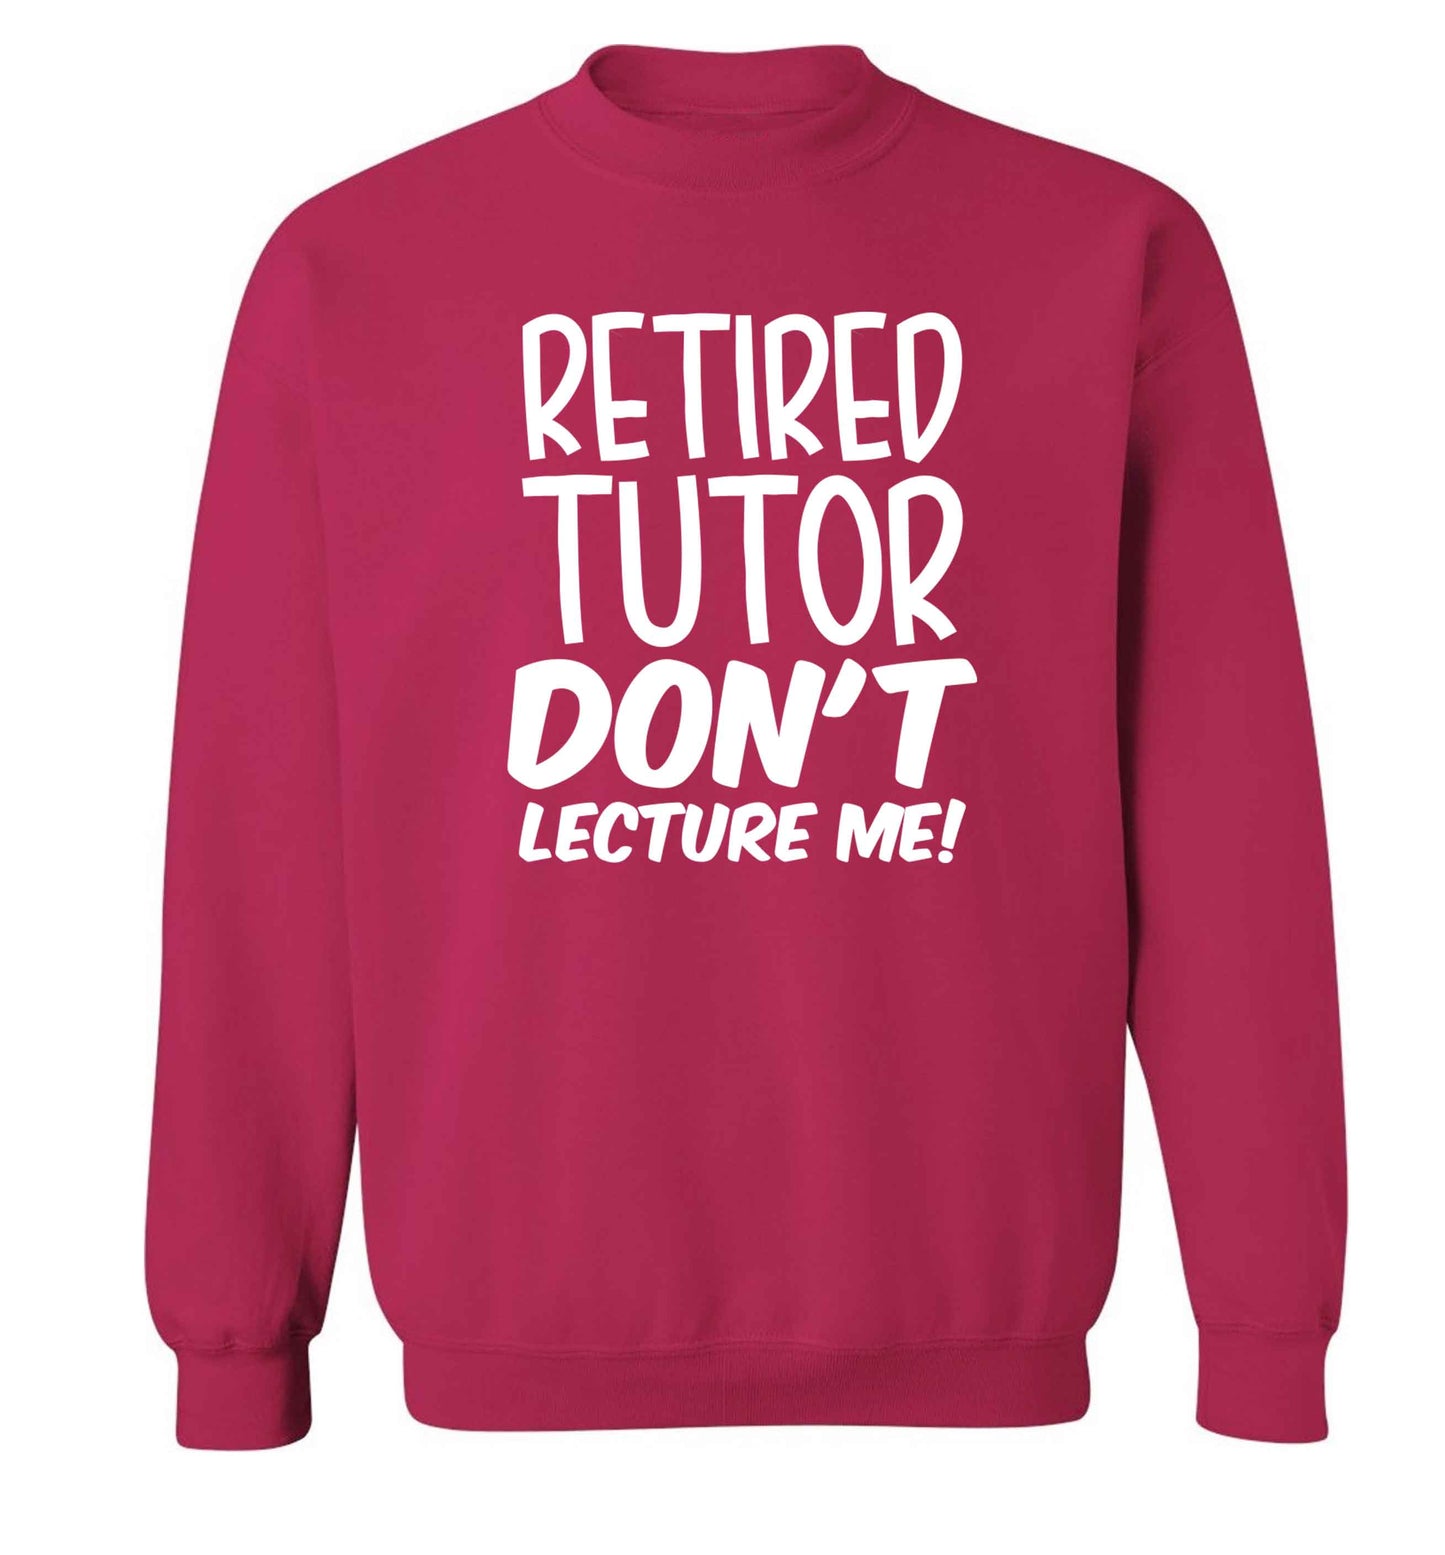 Retired tutor don't lecture me! Adult's unisex pink Sweater 2XL